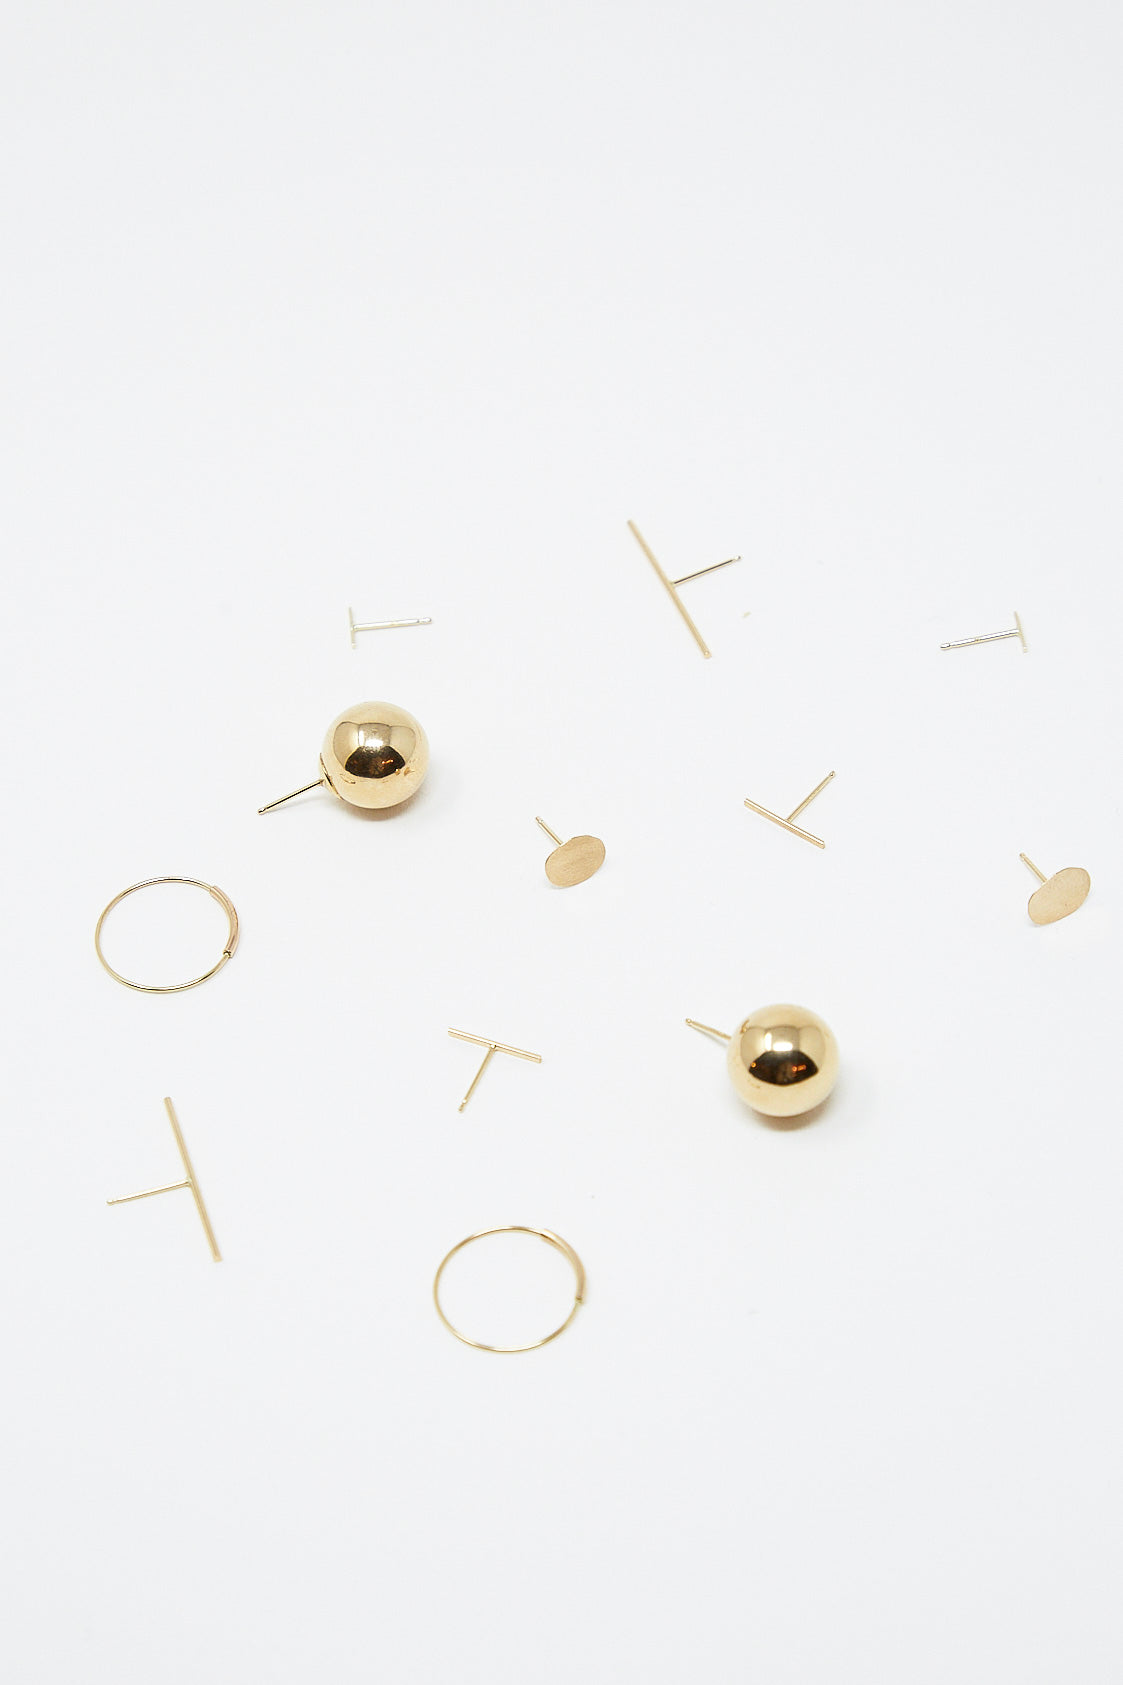 A group of Kathleen Whitaker's Foil Stud 7mm Single Earrings in 14K Yellow Gold on a white surface in Los Angeles.